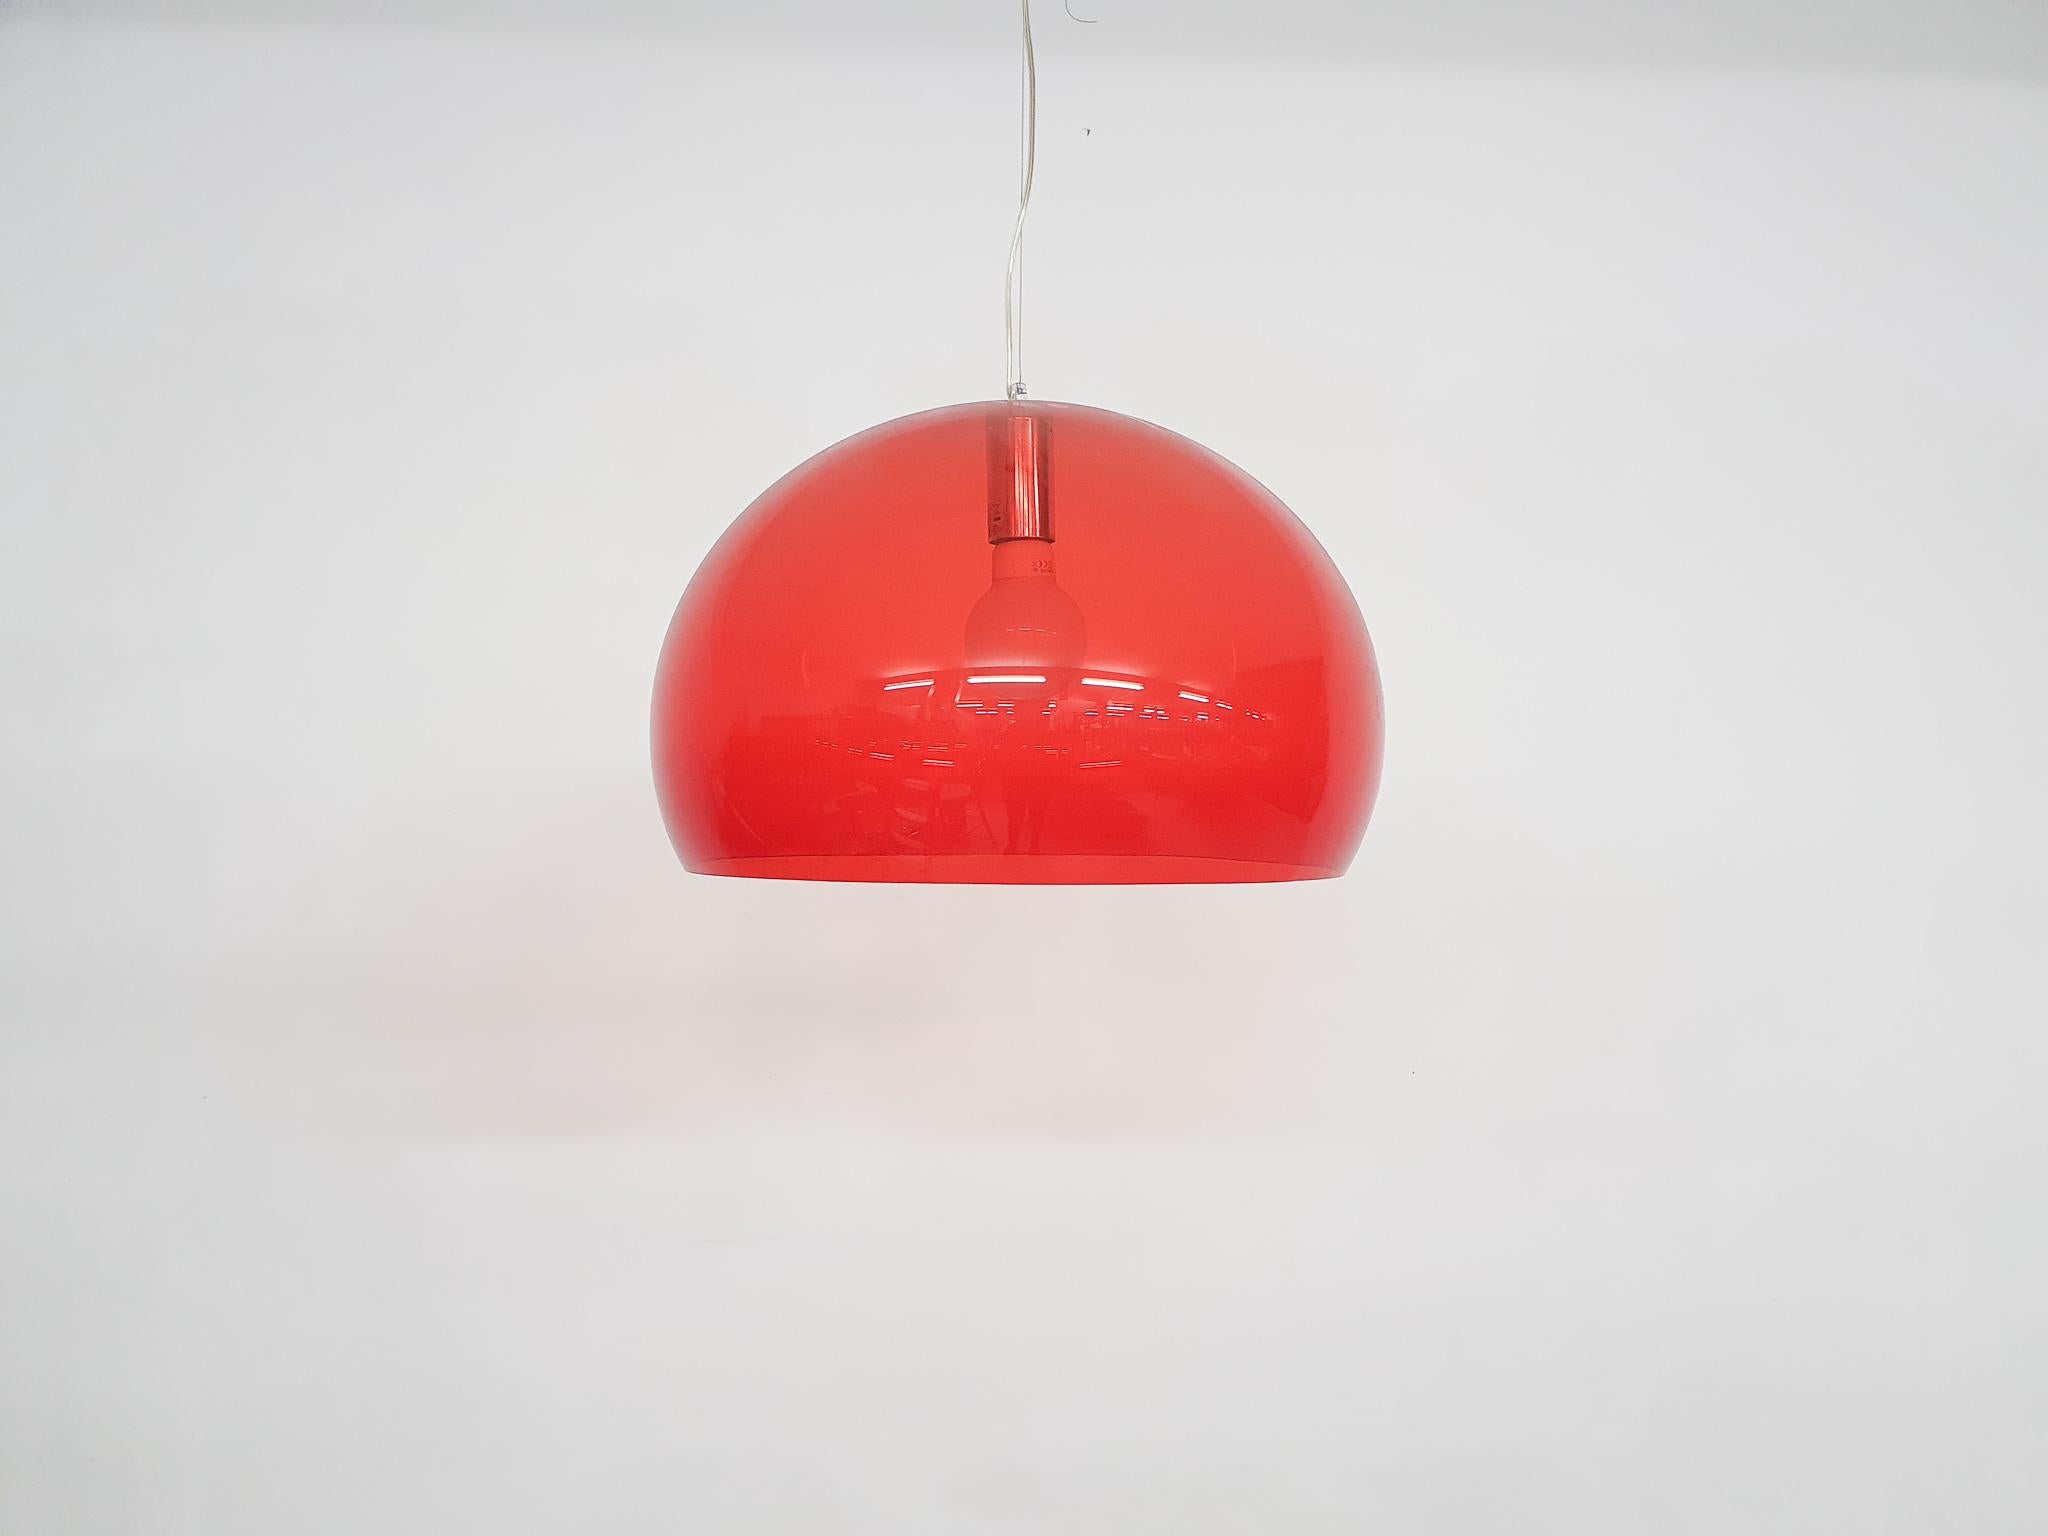 Large model of transparant red PPMA plastic pendant light
Ferruccio Laviani is an architect and designer. He has started his career with Michele De Lucchi and now runs his own studio. In 2000 he won the Guggenheim Business & Culture Award.